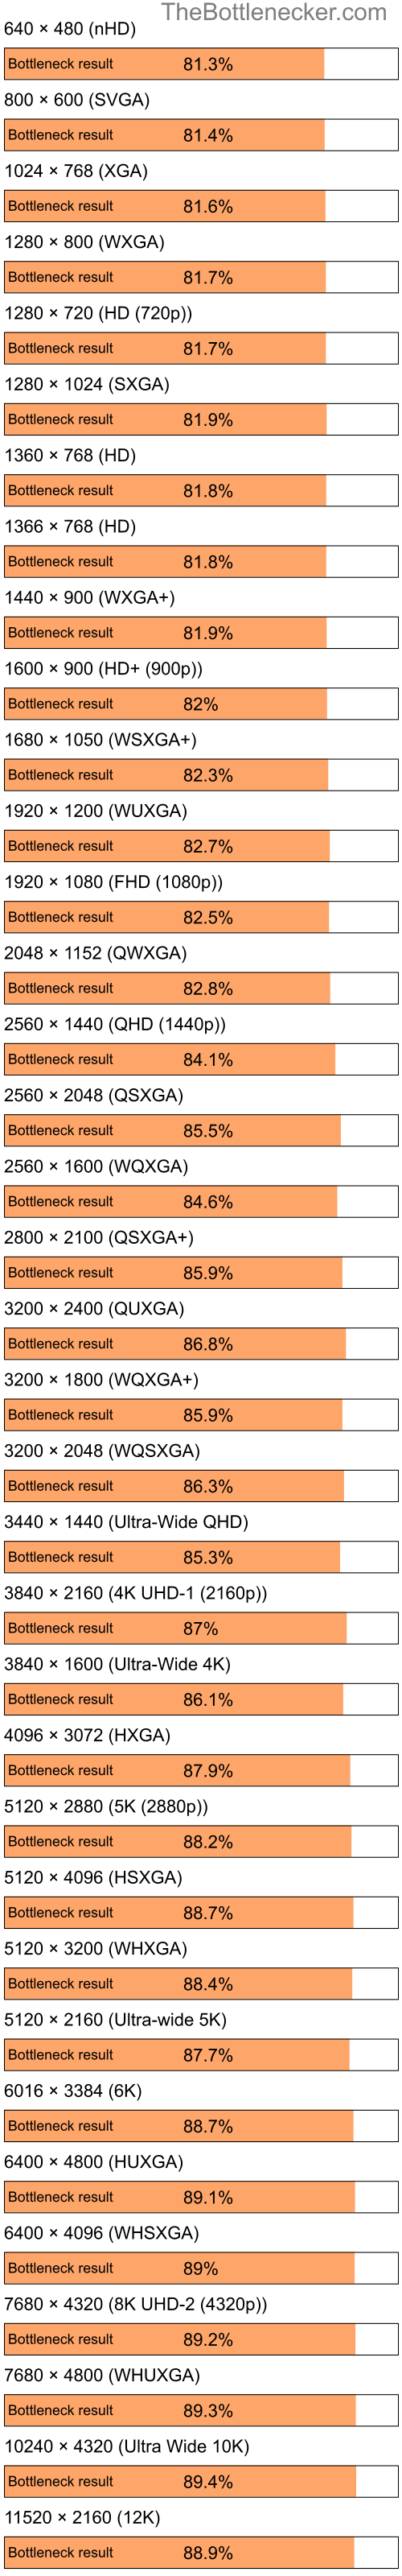 Bottleneck results by resolution for Intel Celeron M and NVIDIA GeForce 7025 in Graphic Card Intense Tasks